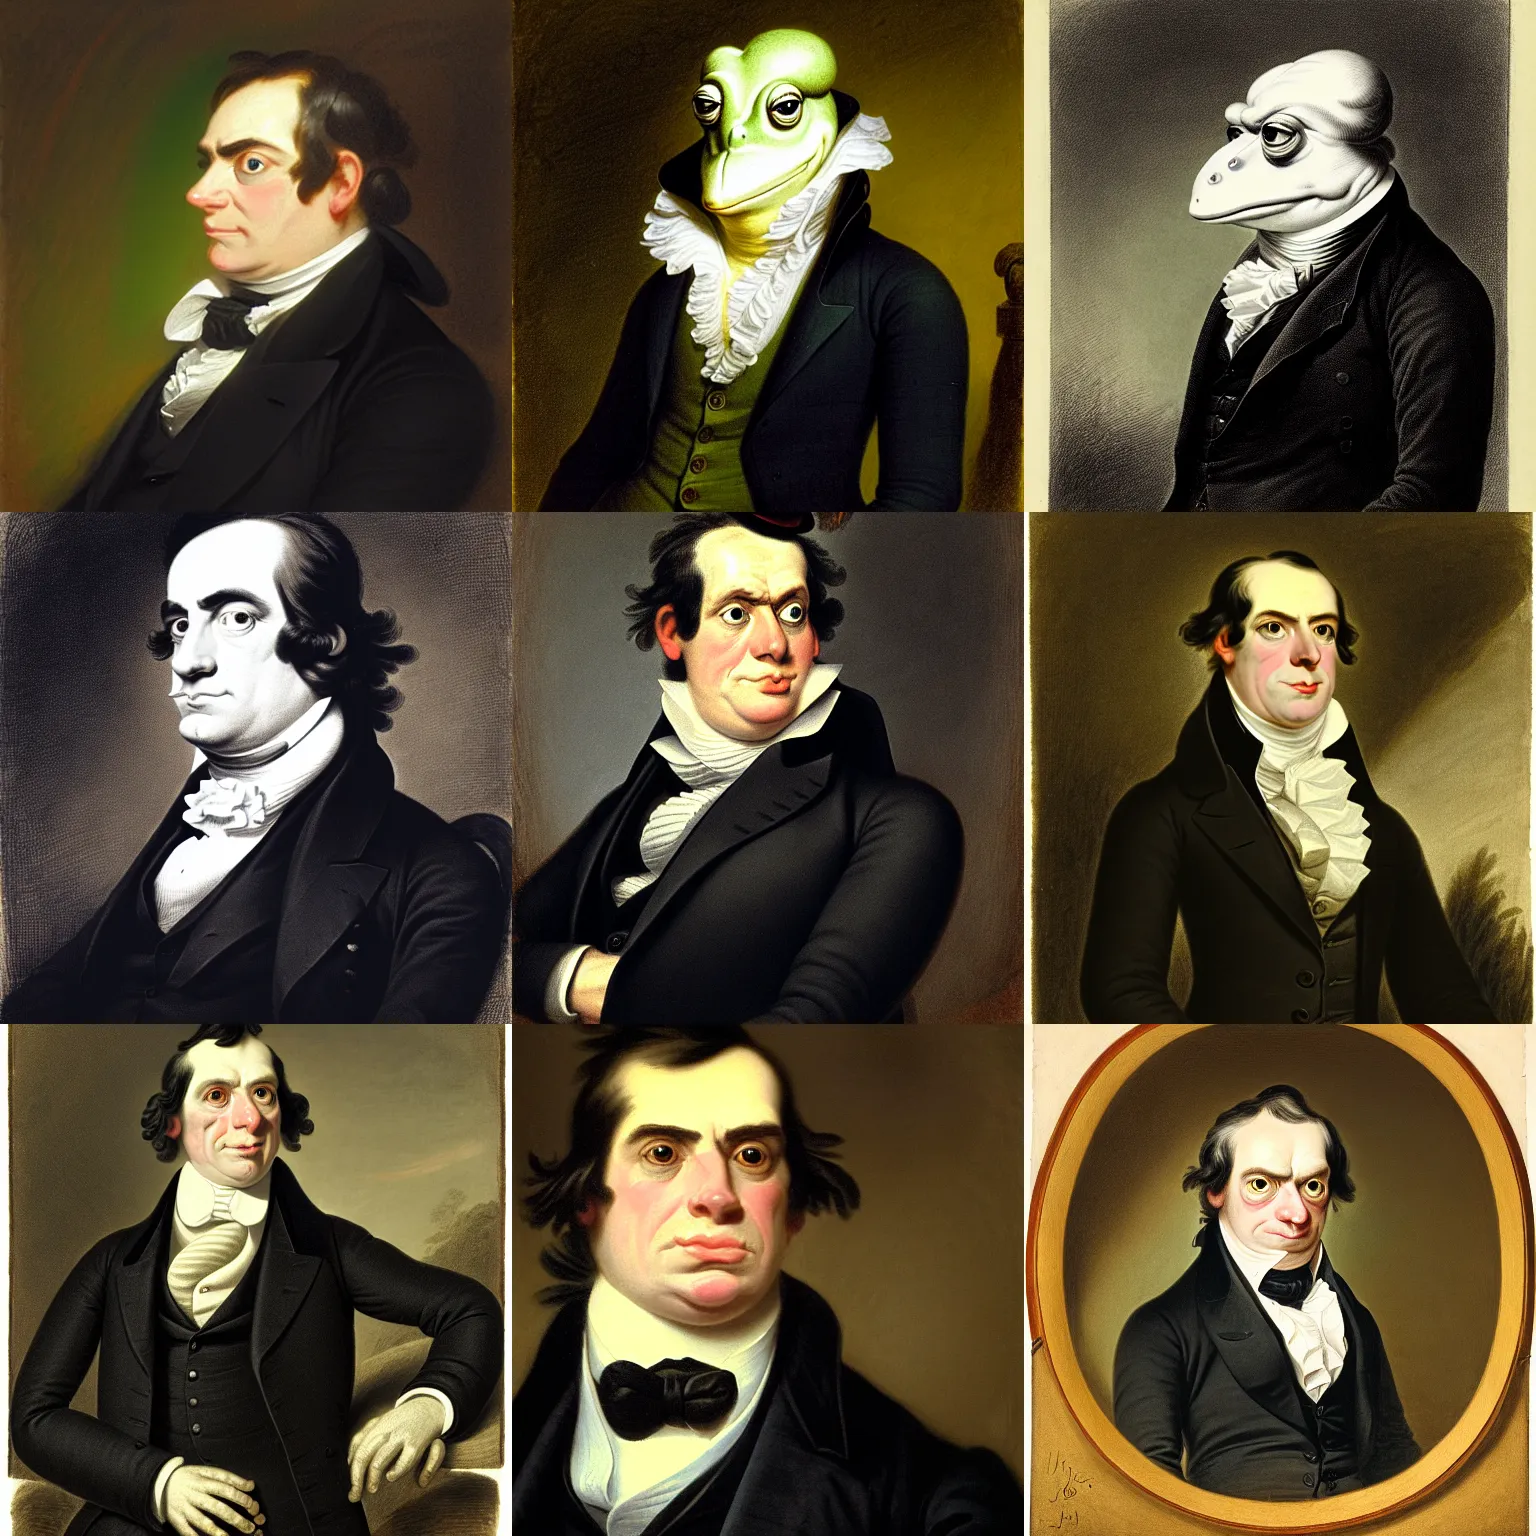 Prompt: a head and shoulders portrait of an anthropomorphic frog wearing a suit looking off camera, a character portrait by john trumbull, american romanticism, soft focus